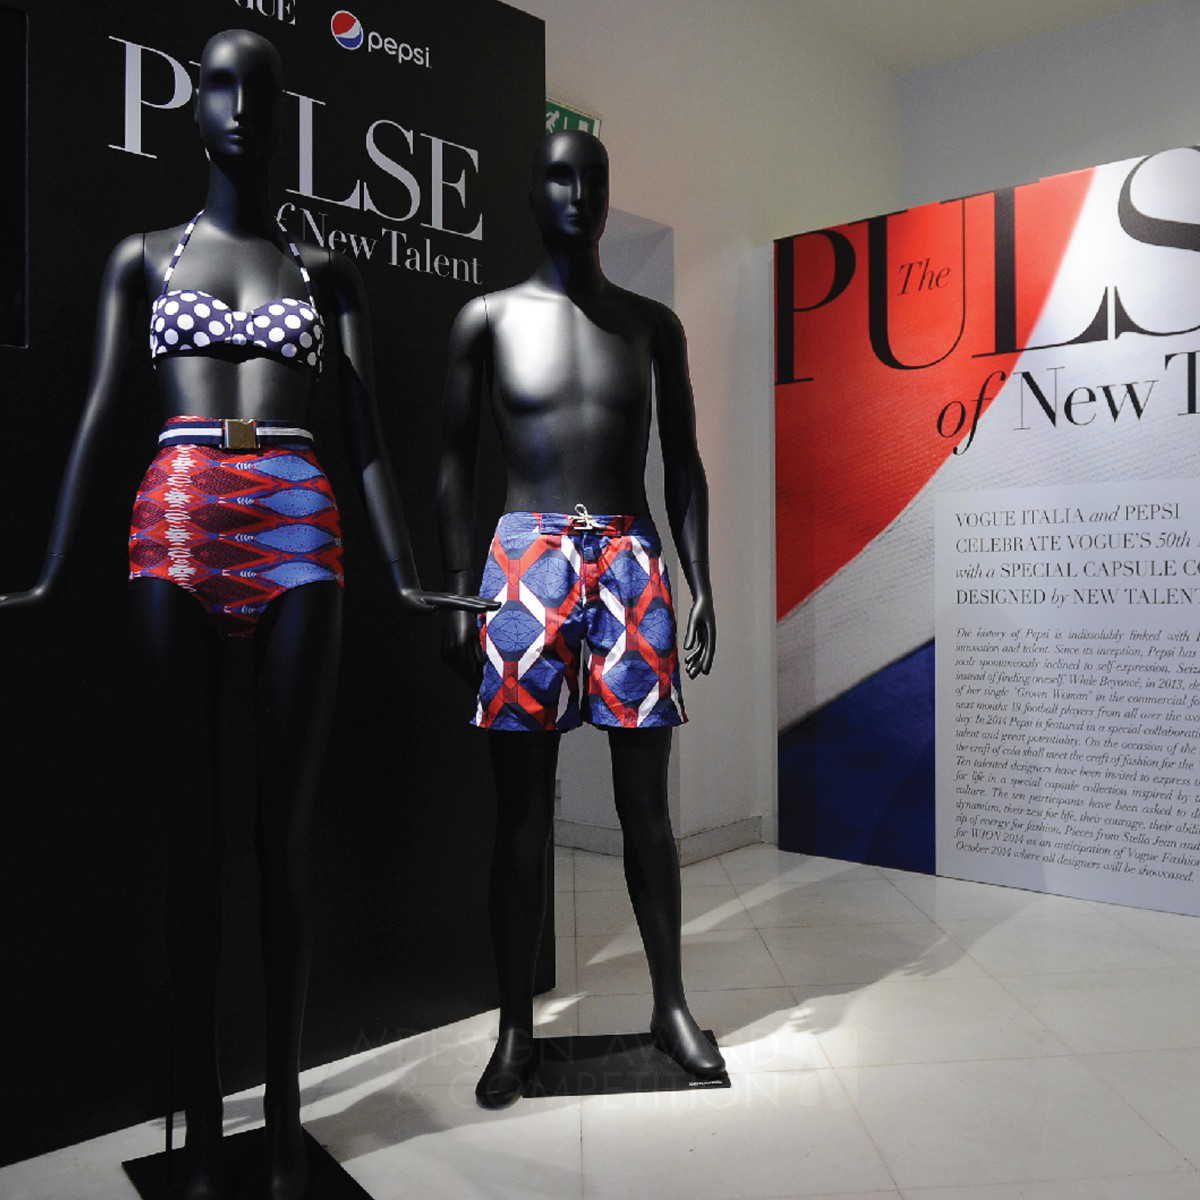 The Pulse of New Talent Fashion Showcase by PepsiCo Design and Innovation